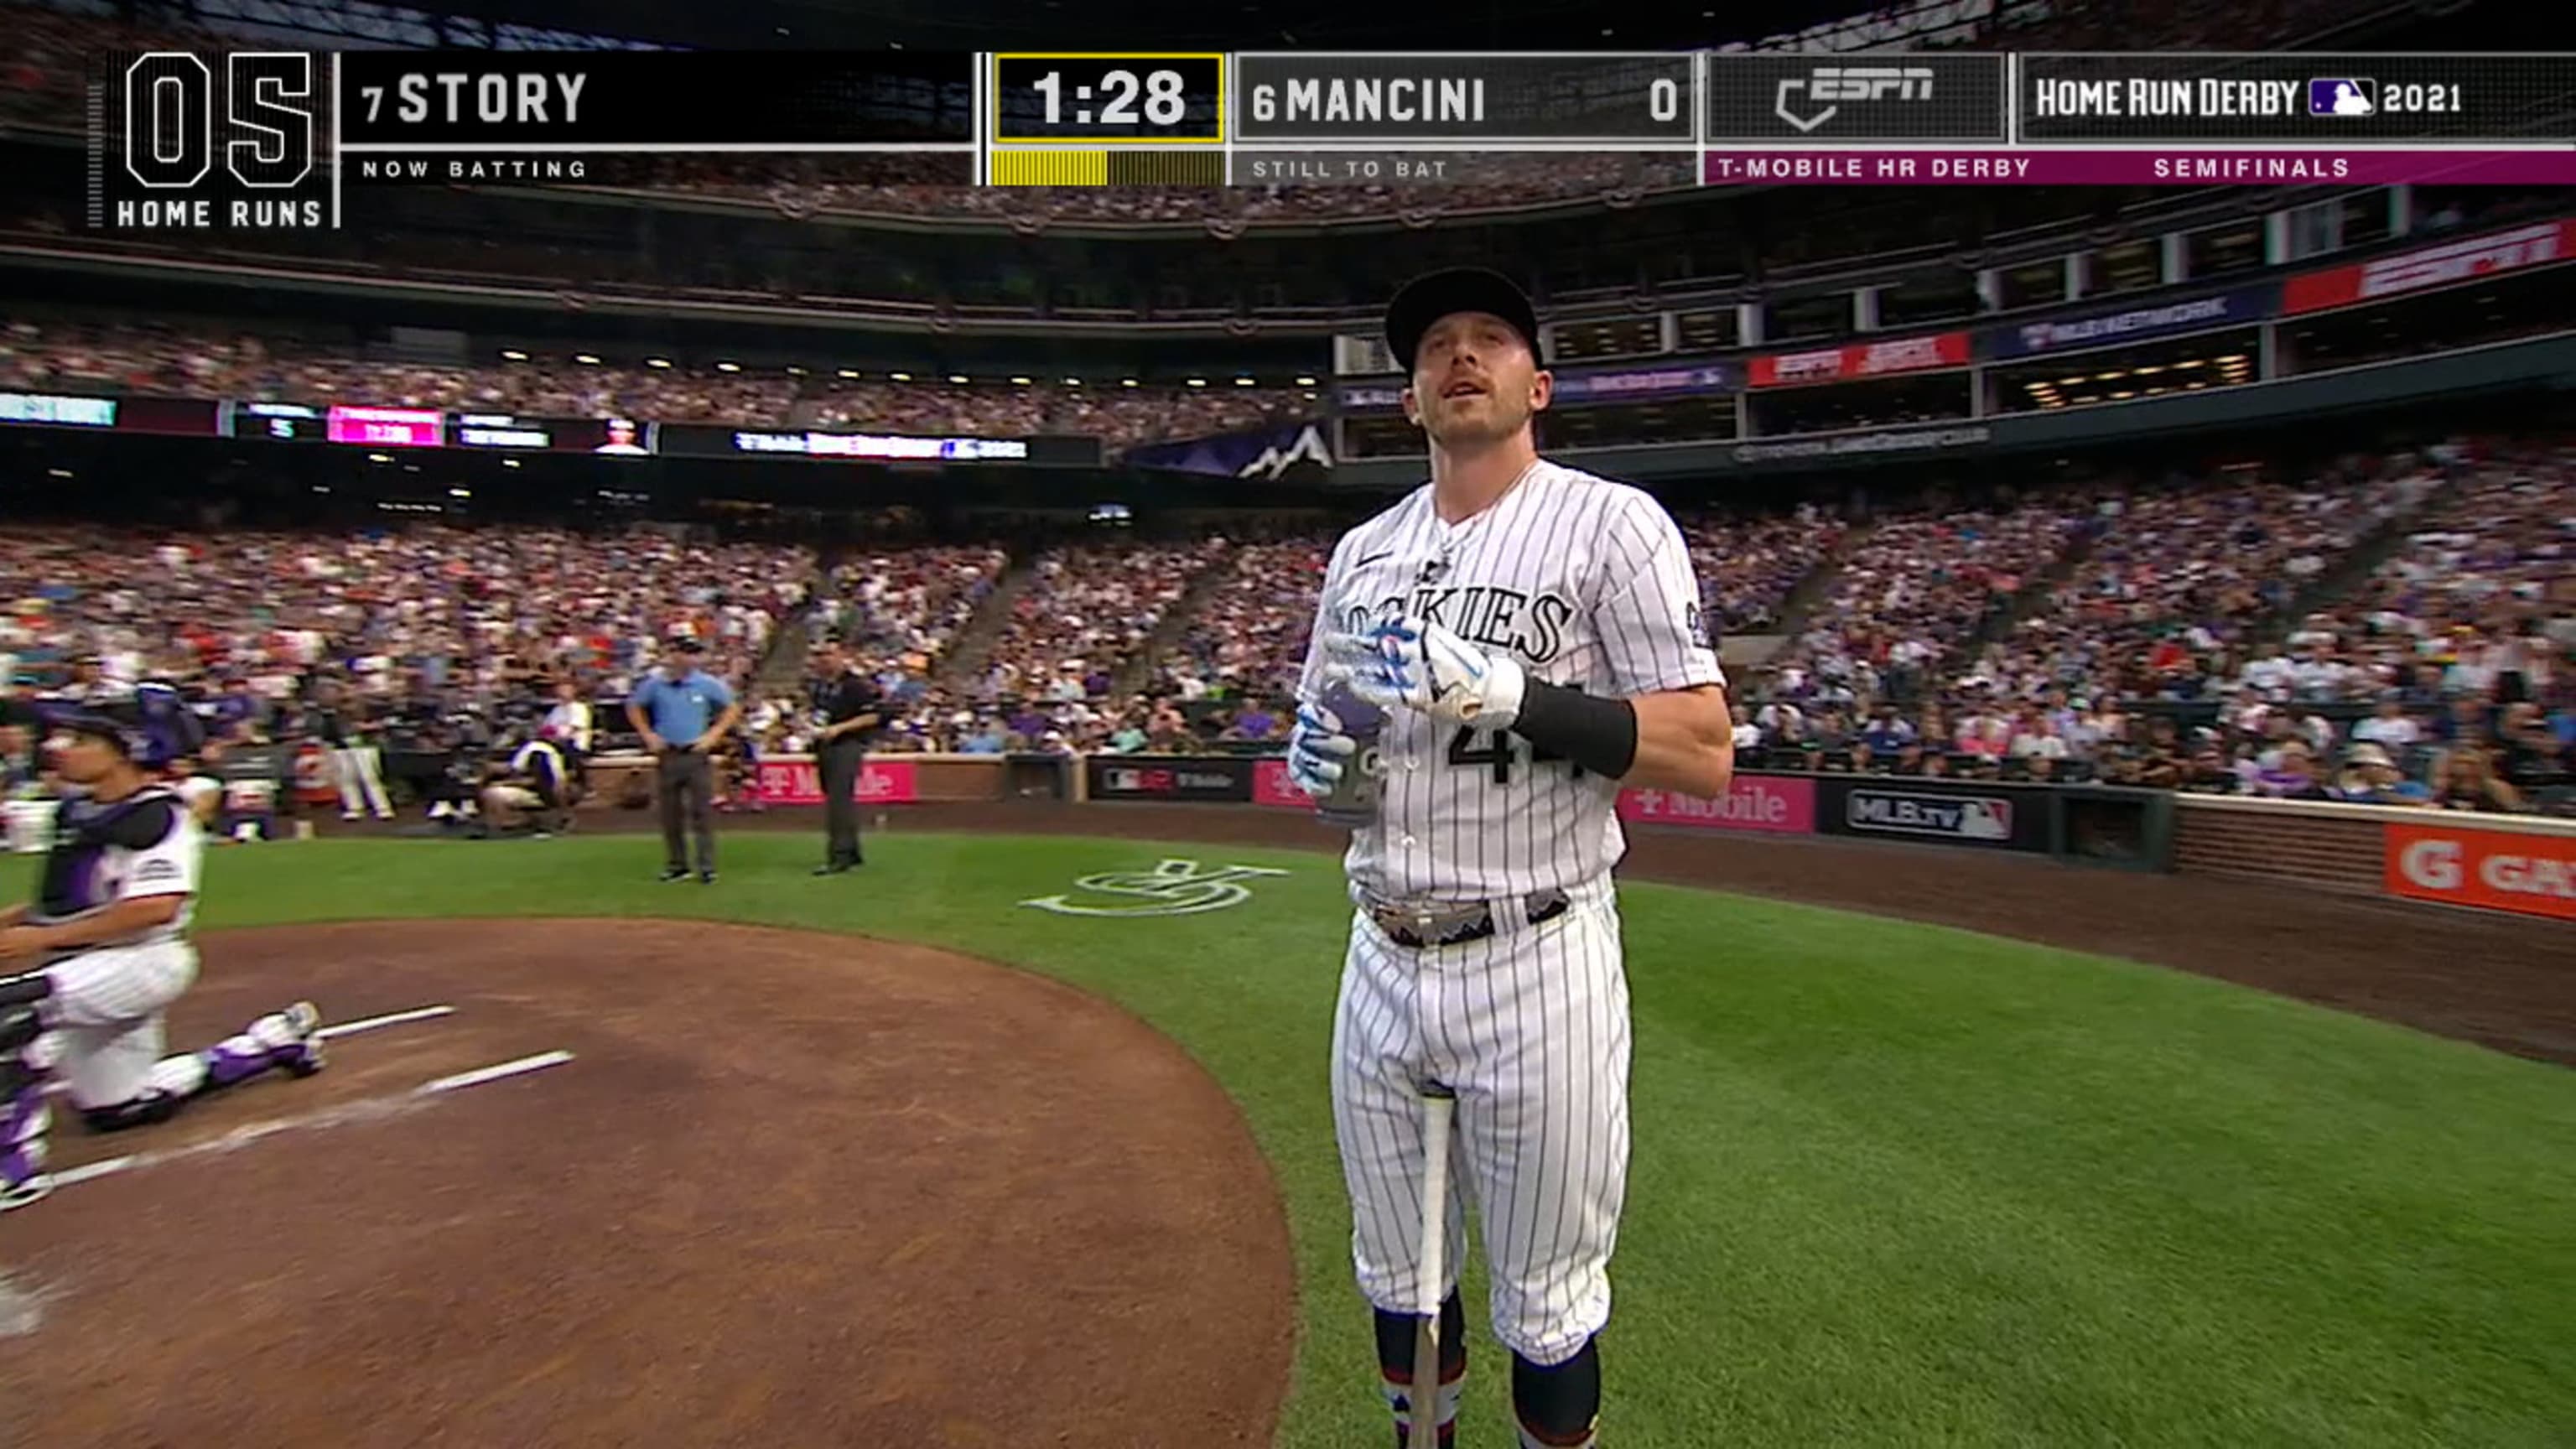 Trevor Story hits 518 foot home run but loses in Round 2 of Home Run Derby